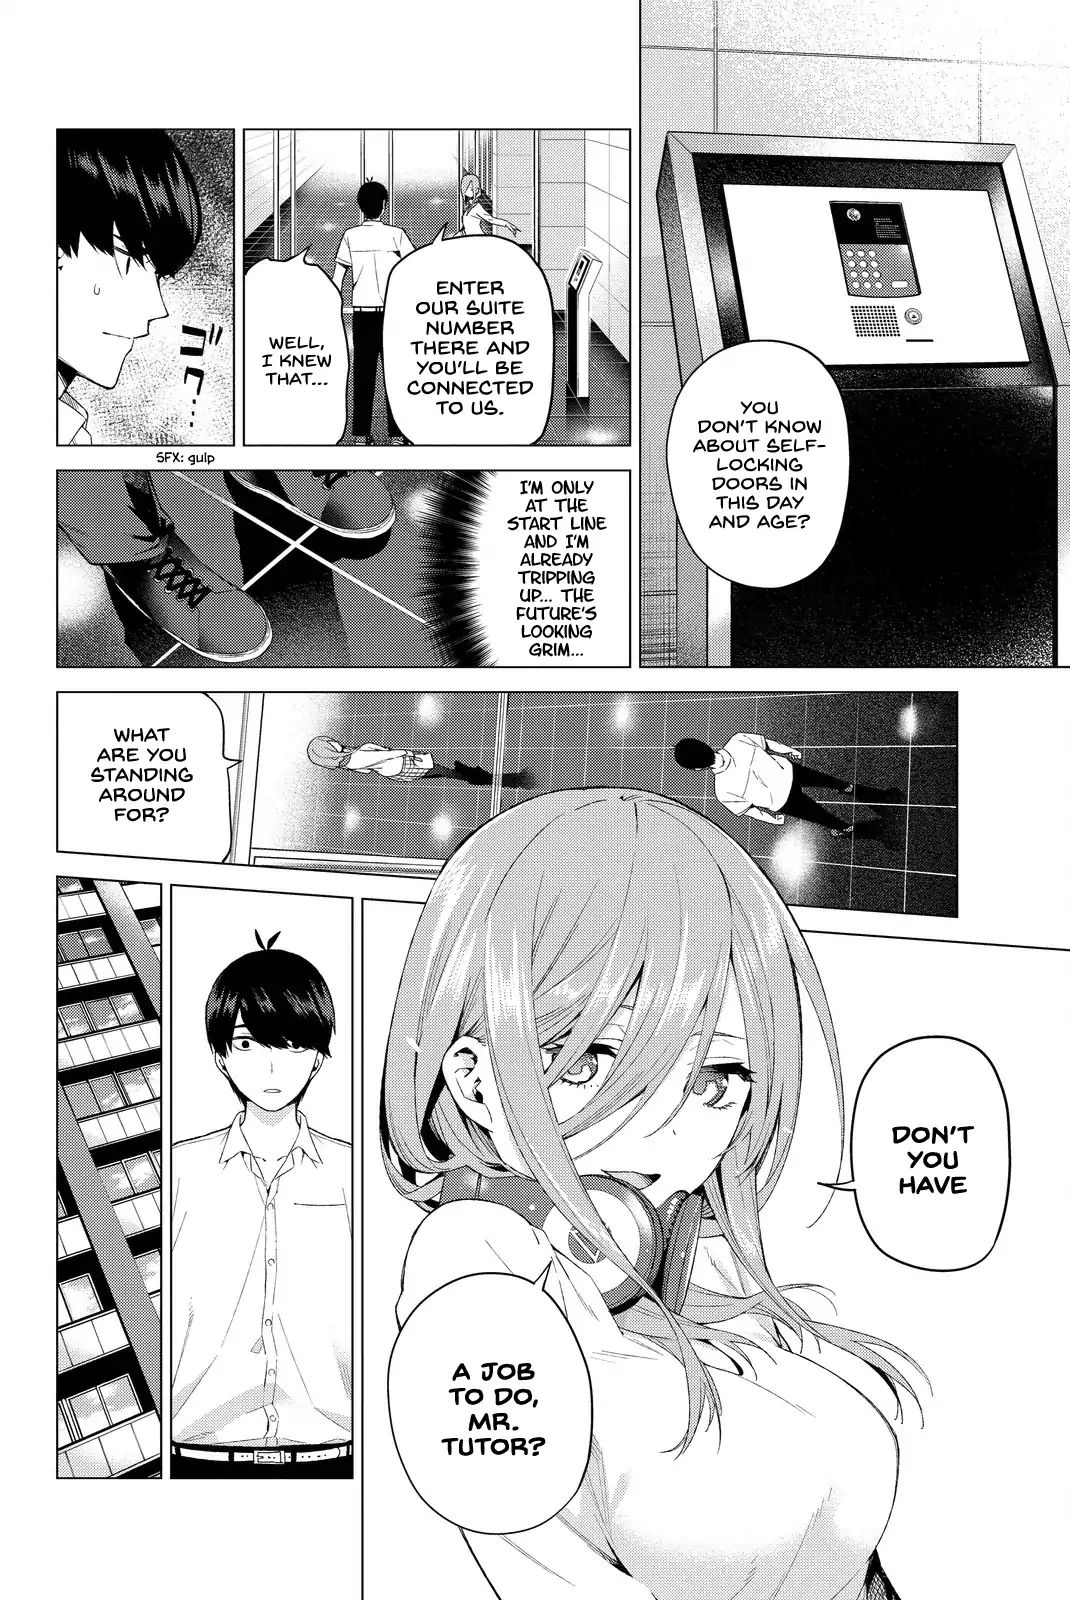 Go-Toubun No Hanayome Vol.1 Chapter 5: A Mountain Of Problems - Picture 2